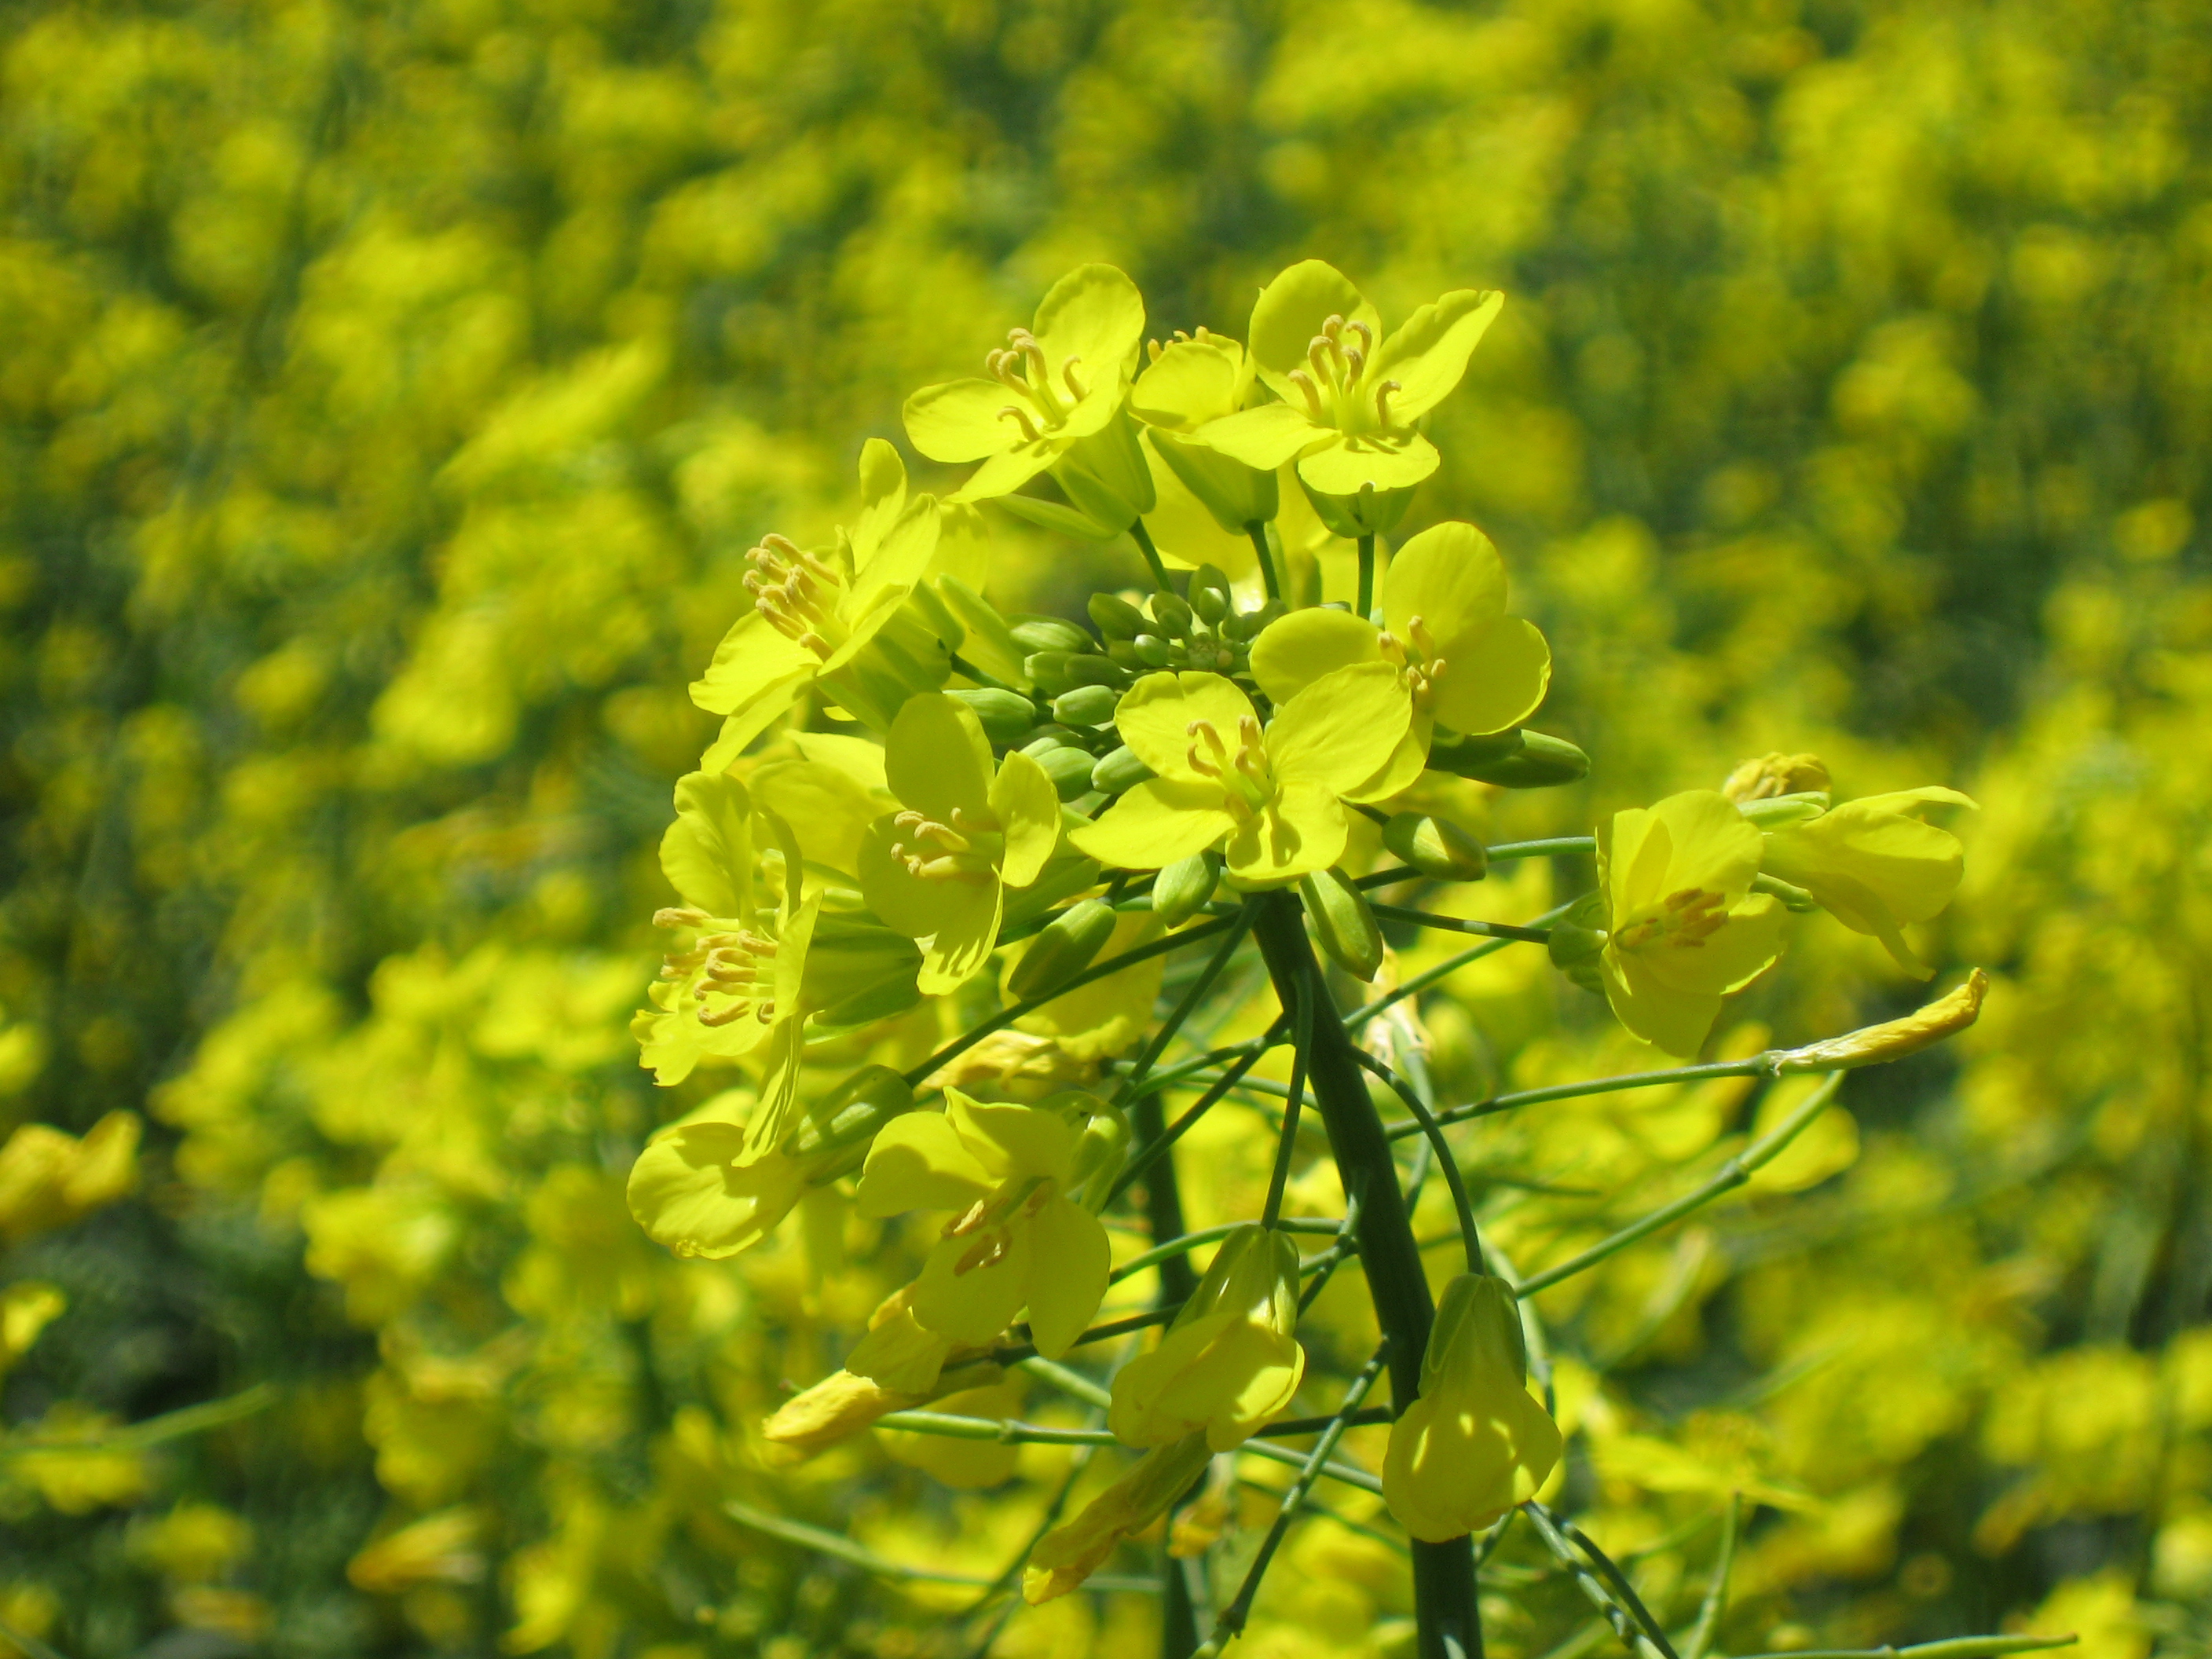 Producers Need to Check Canola for Effectiveness of Seed Treatments on Aphids